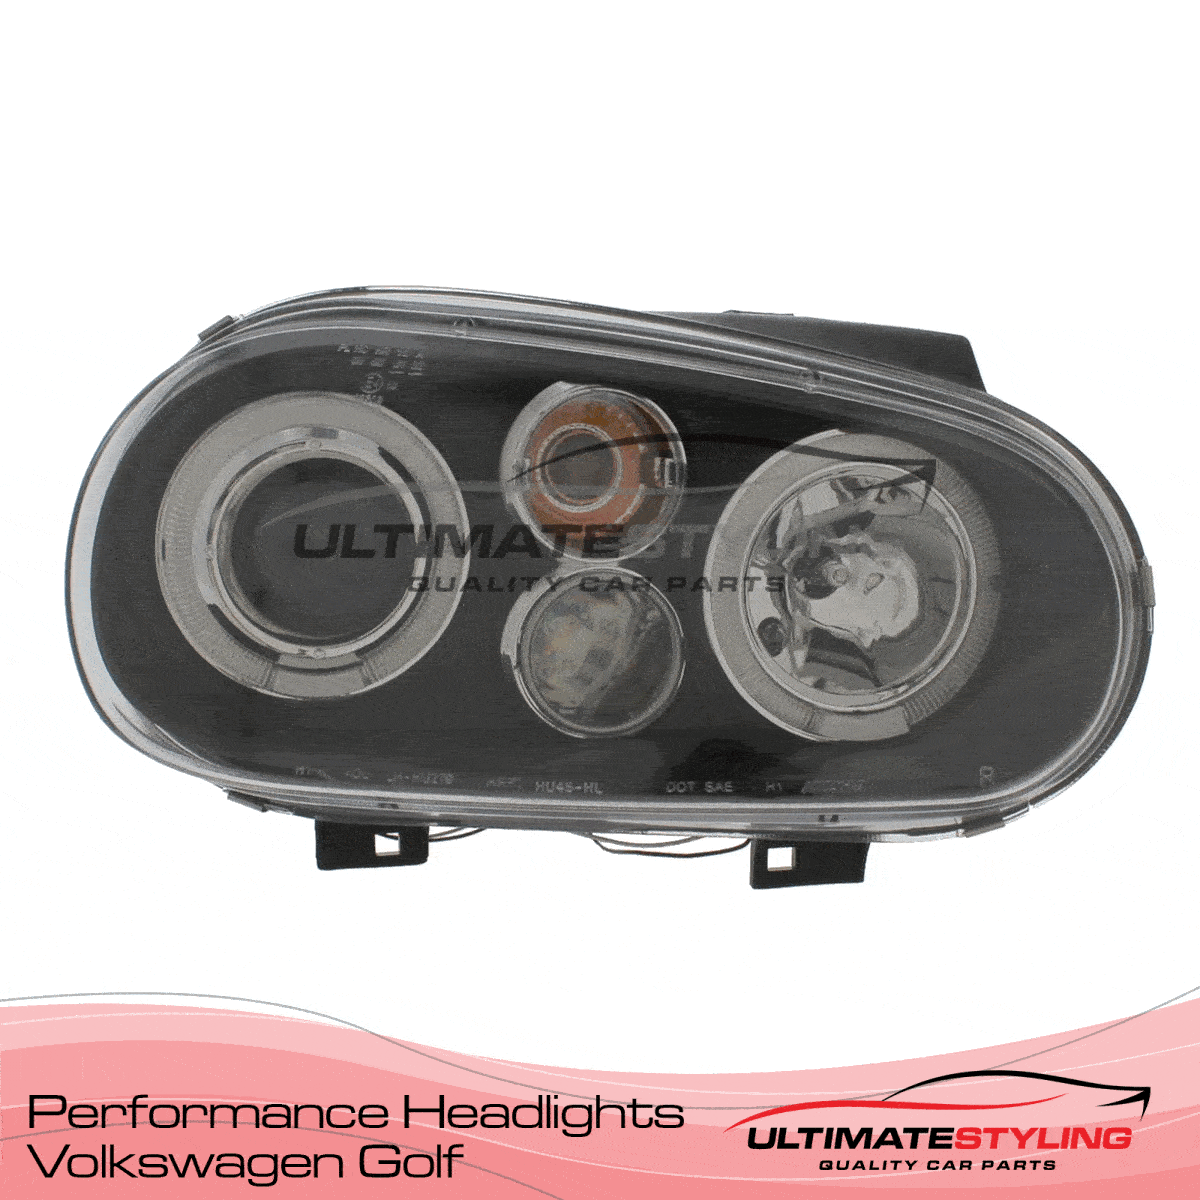 360 view of a VW Golf aftermarket headlight upgrade